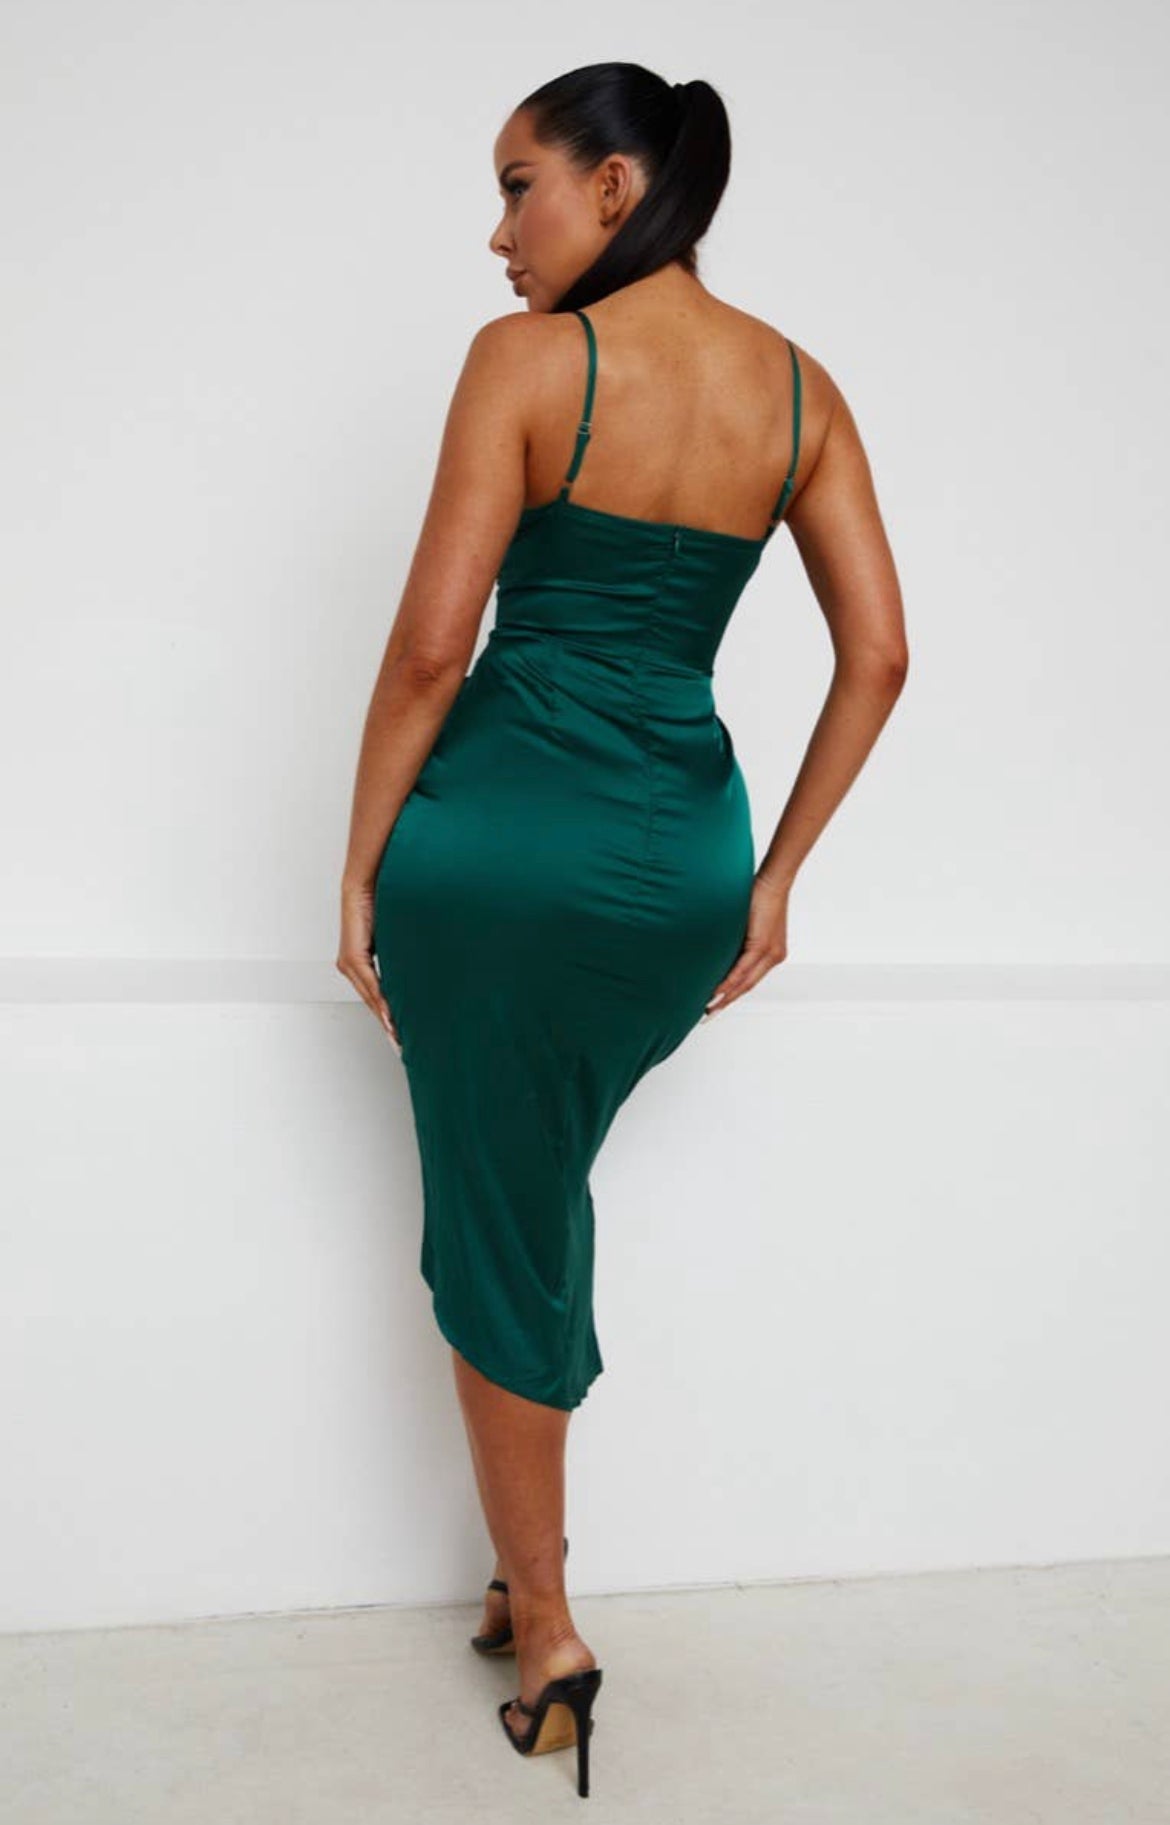 Elegant Emerald Bodycon Midi Dress with Ruched Detailing and Split Design | Sizes 6-12 Available